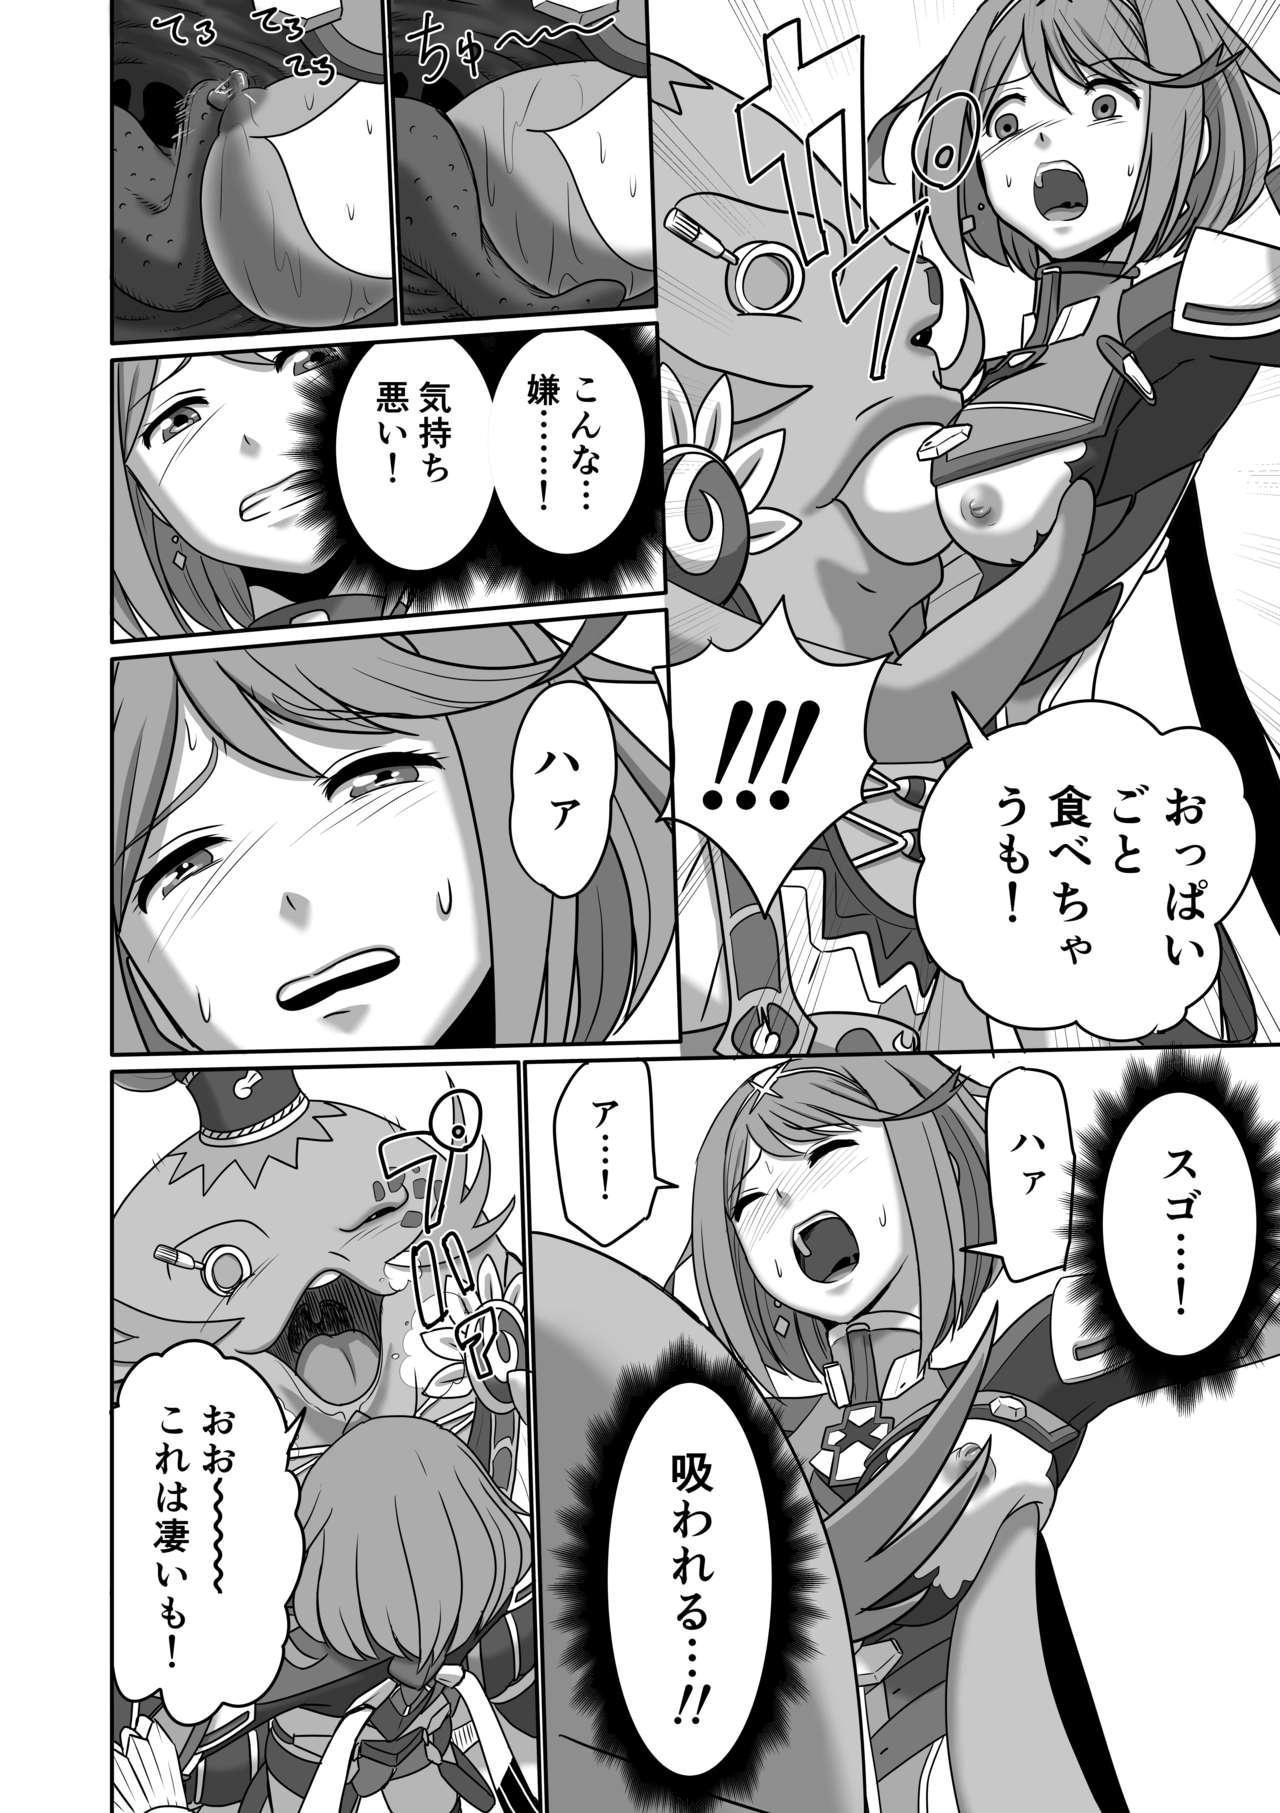 Comedor BLADE SET DX - Xenoblade chronicles 2 Sixtynine - Page 10